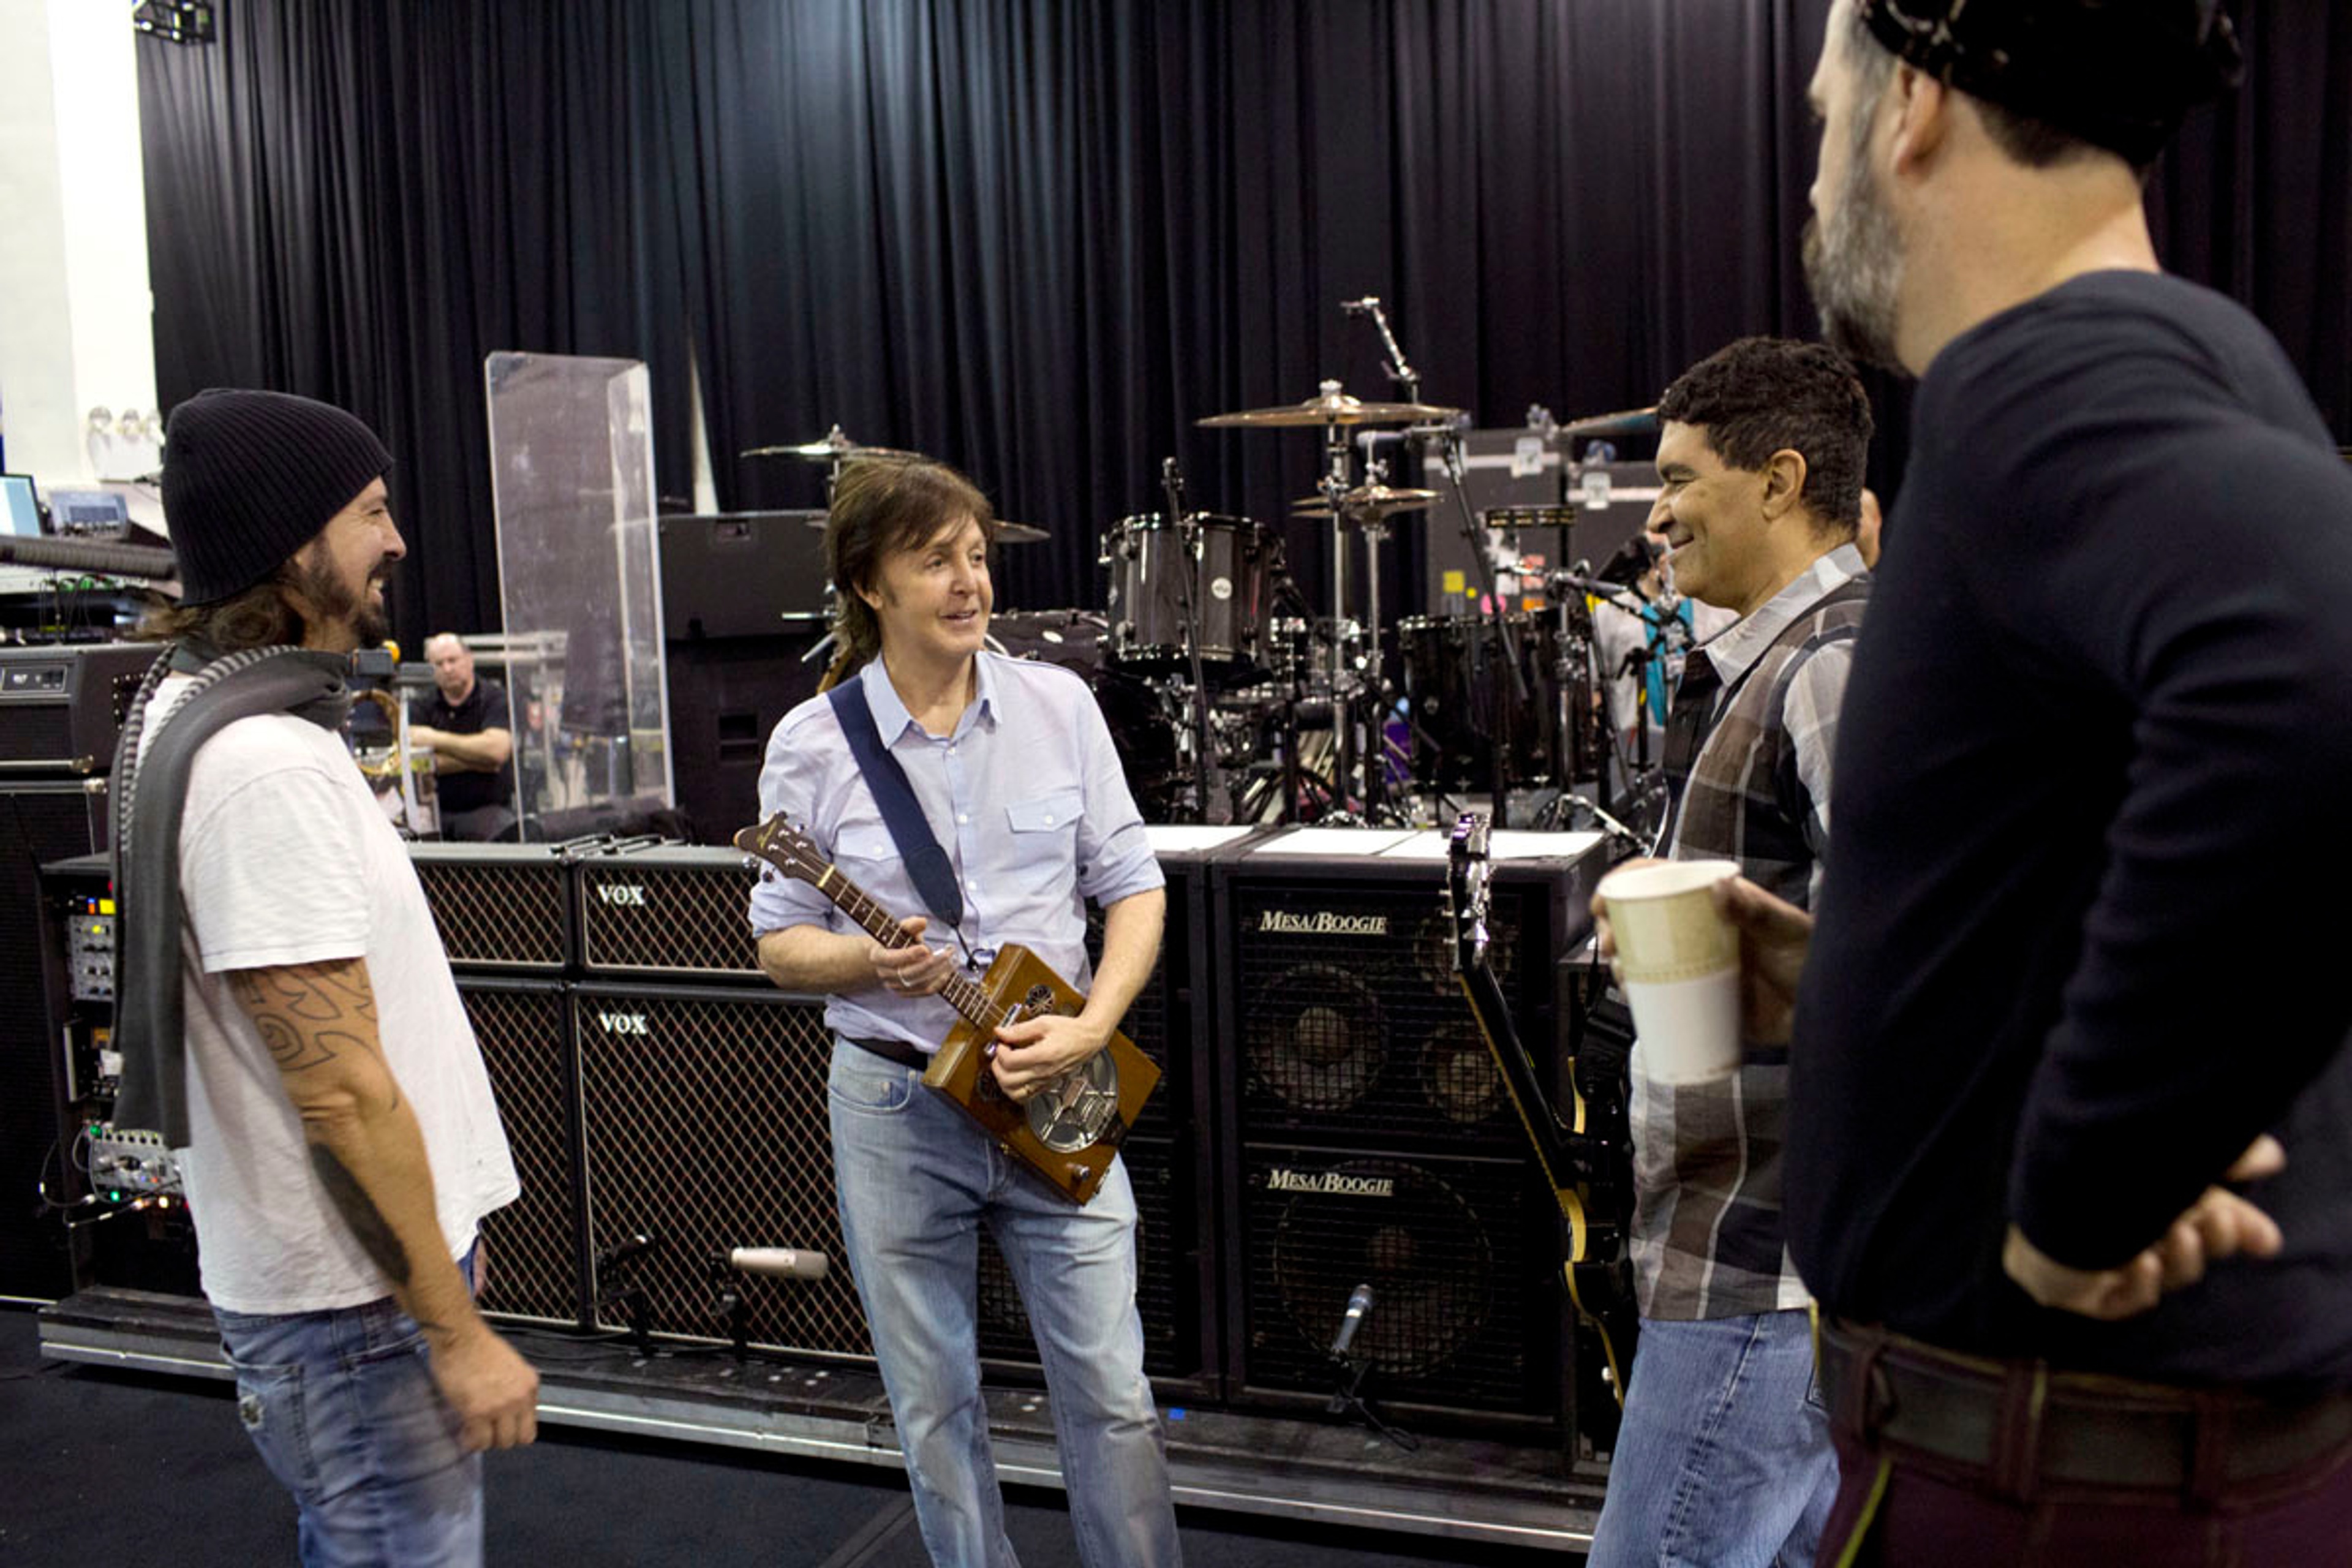 Dave Grohl, Paul, Pat Smear and Krist Novoselic at rehearsals, 12-12-12 Hurricane Sandy Benefit, Madison Square Garden, NYC, 10th December 2012